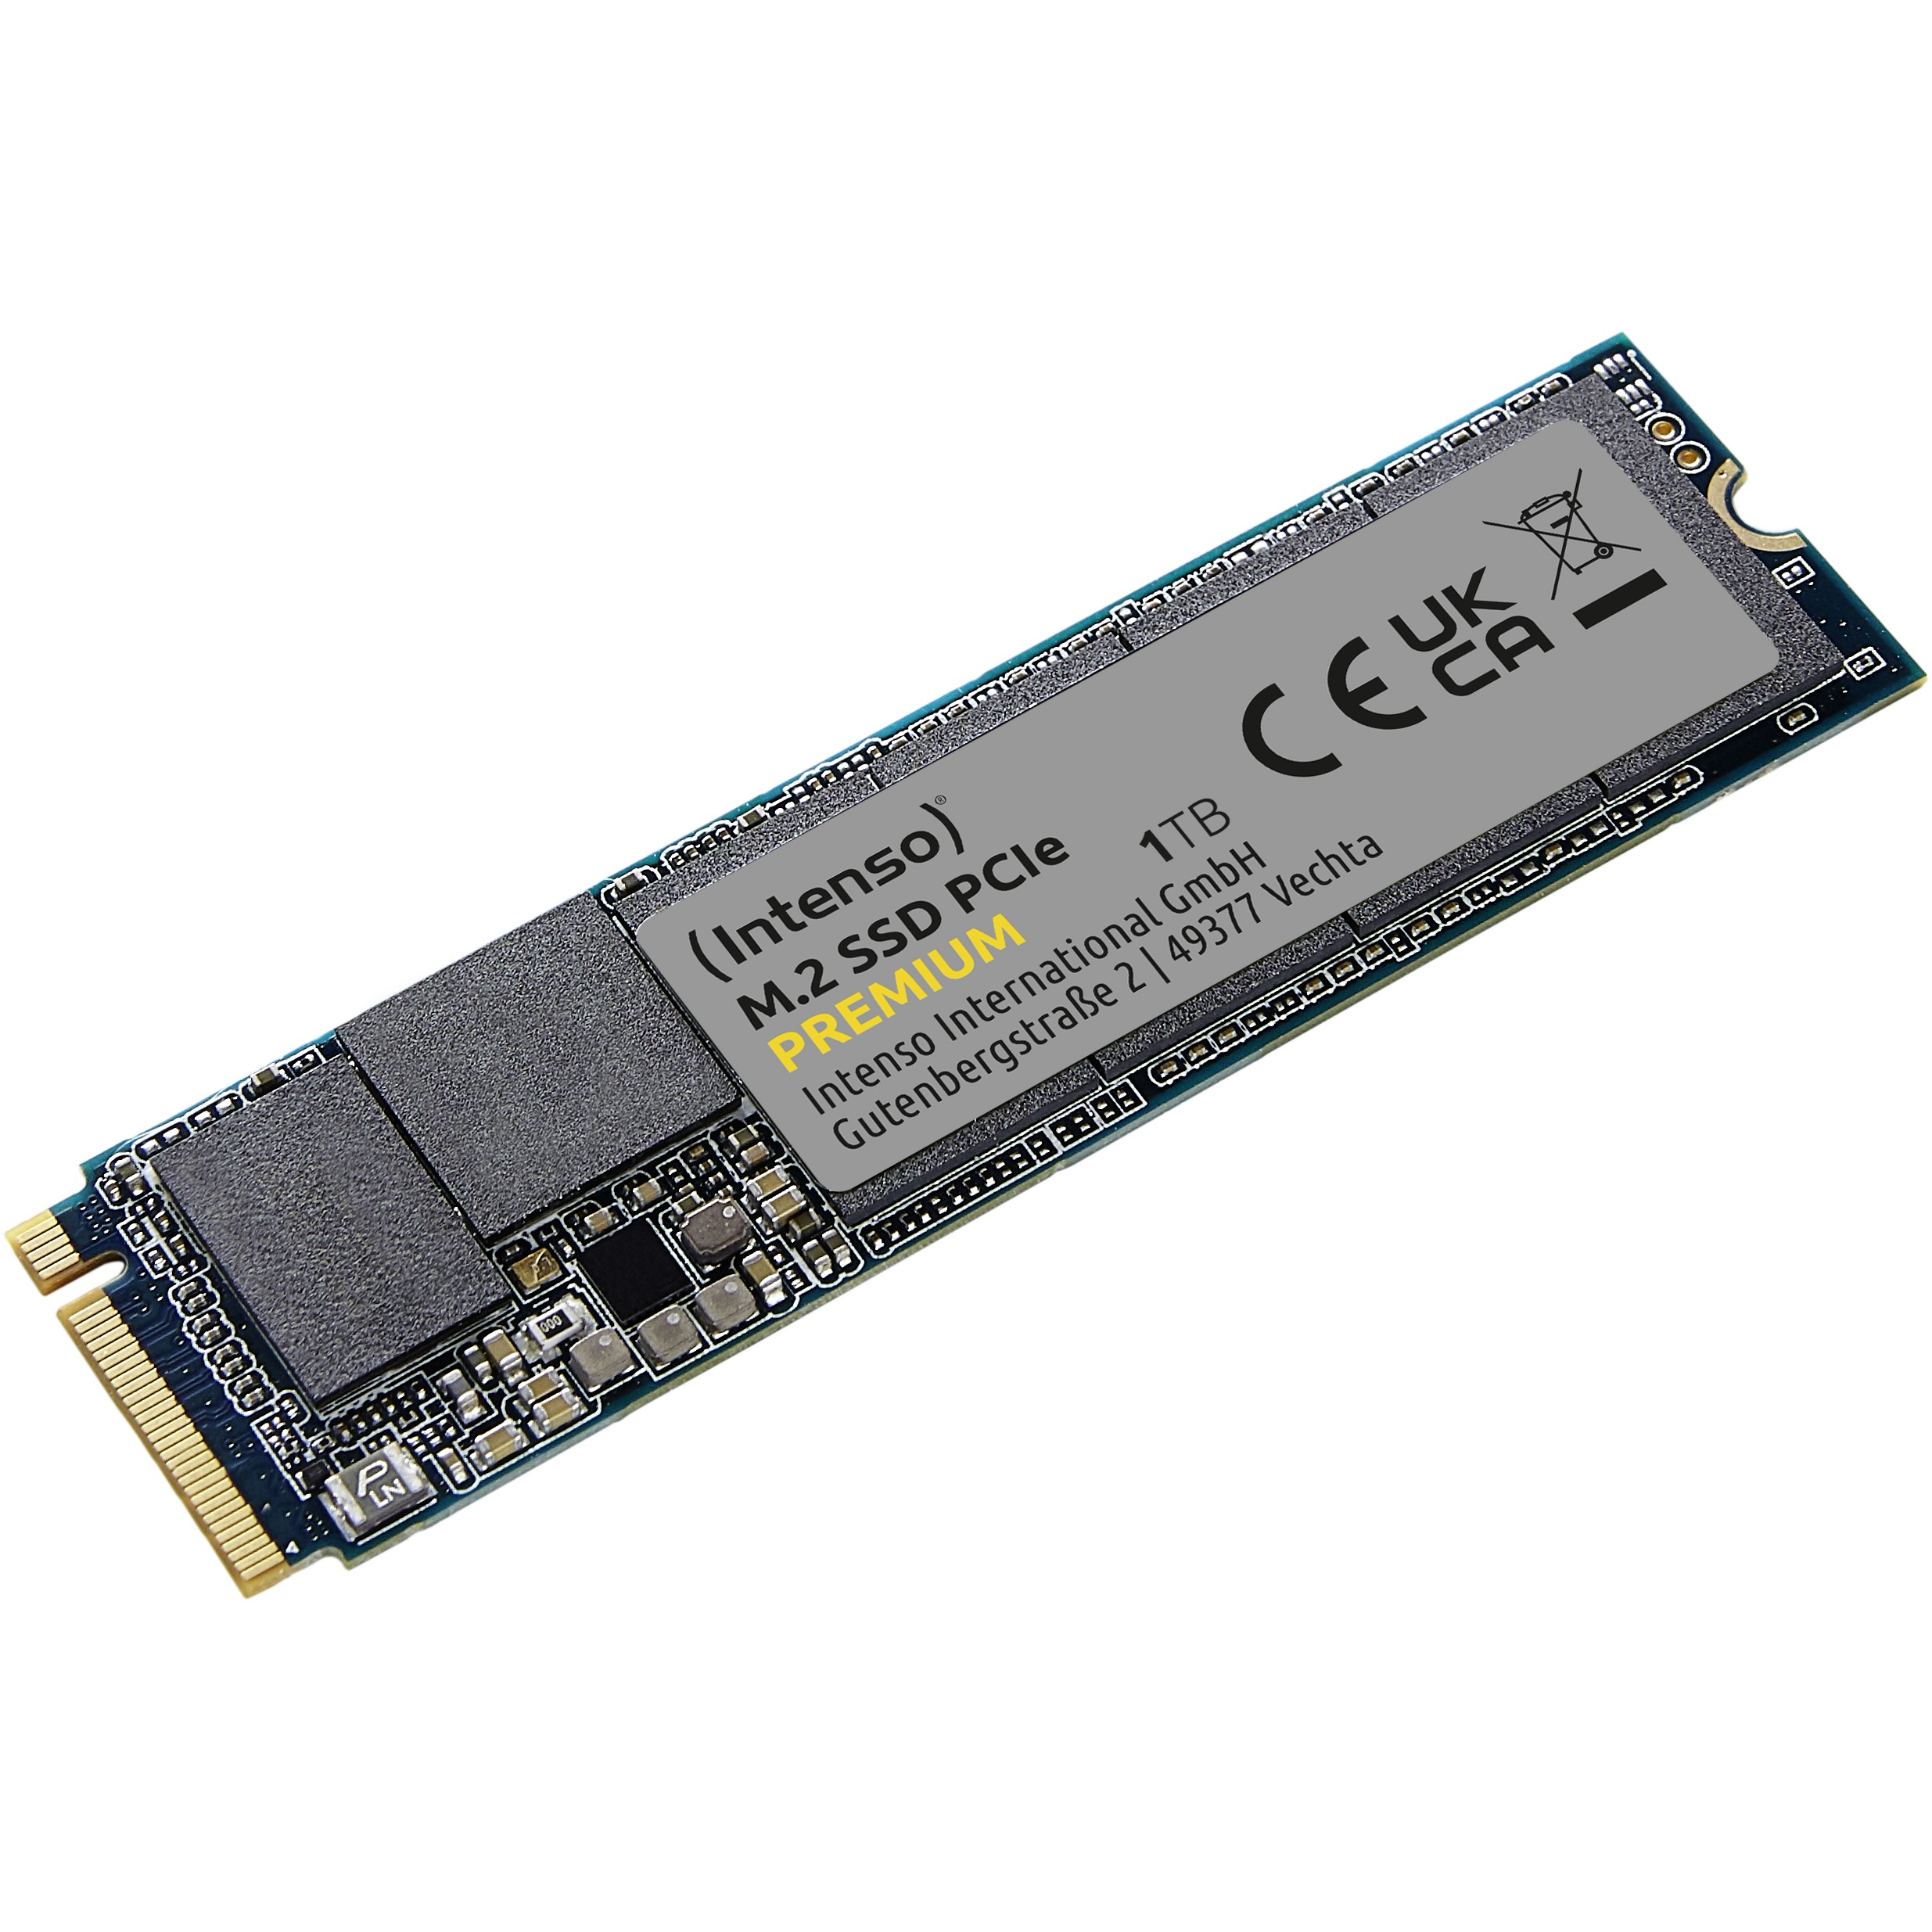 Intenso 3835460 internal solid state drive - 3835460